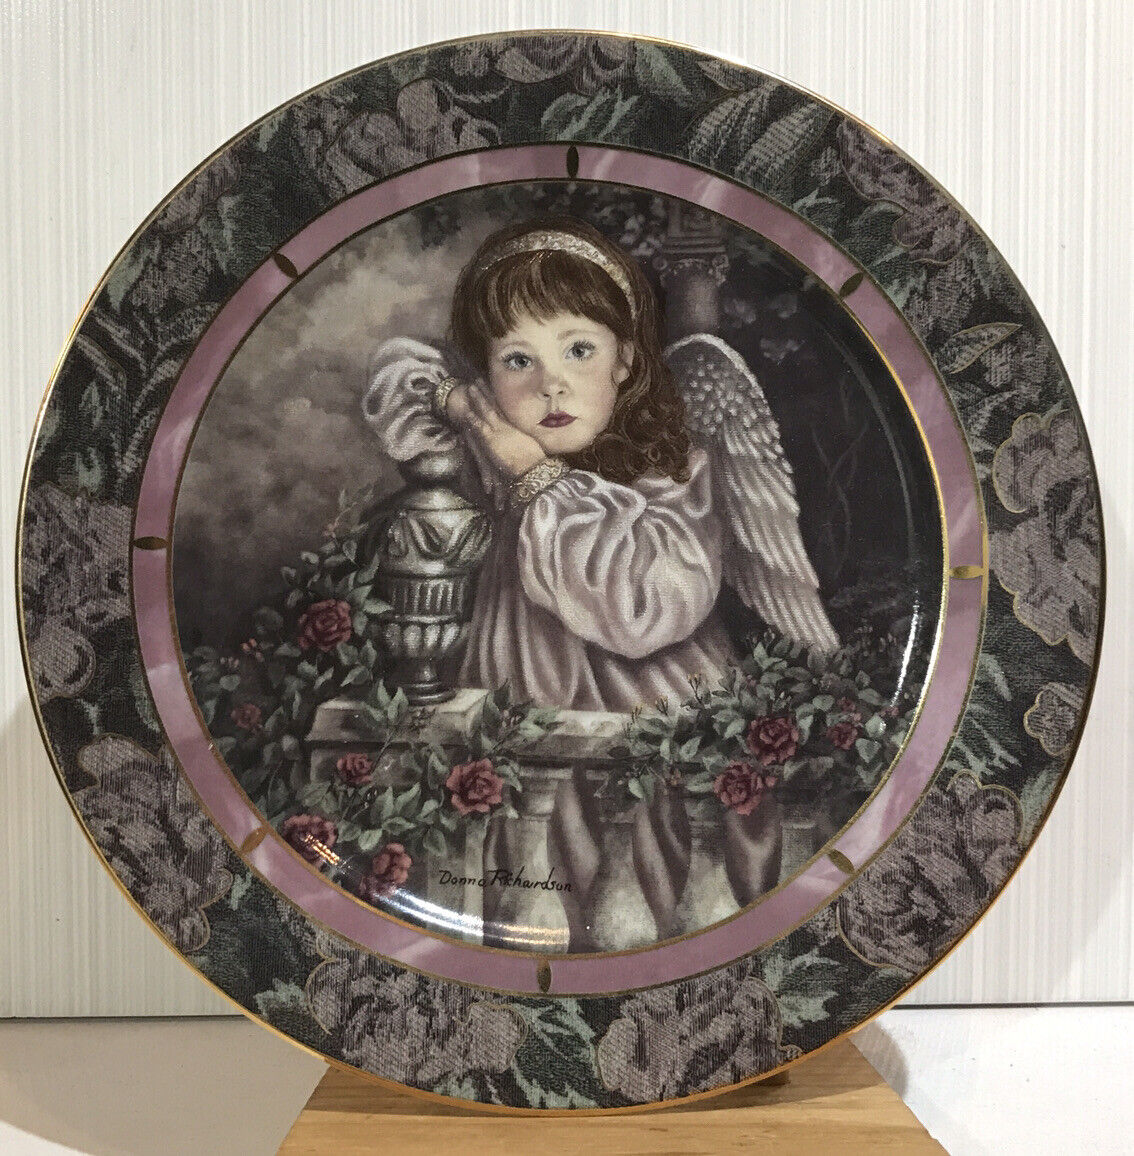 HOPE Angel Plate by Donna Richardson First Issue Gardens Of Innocence Bradford